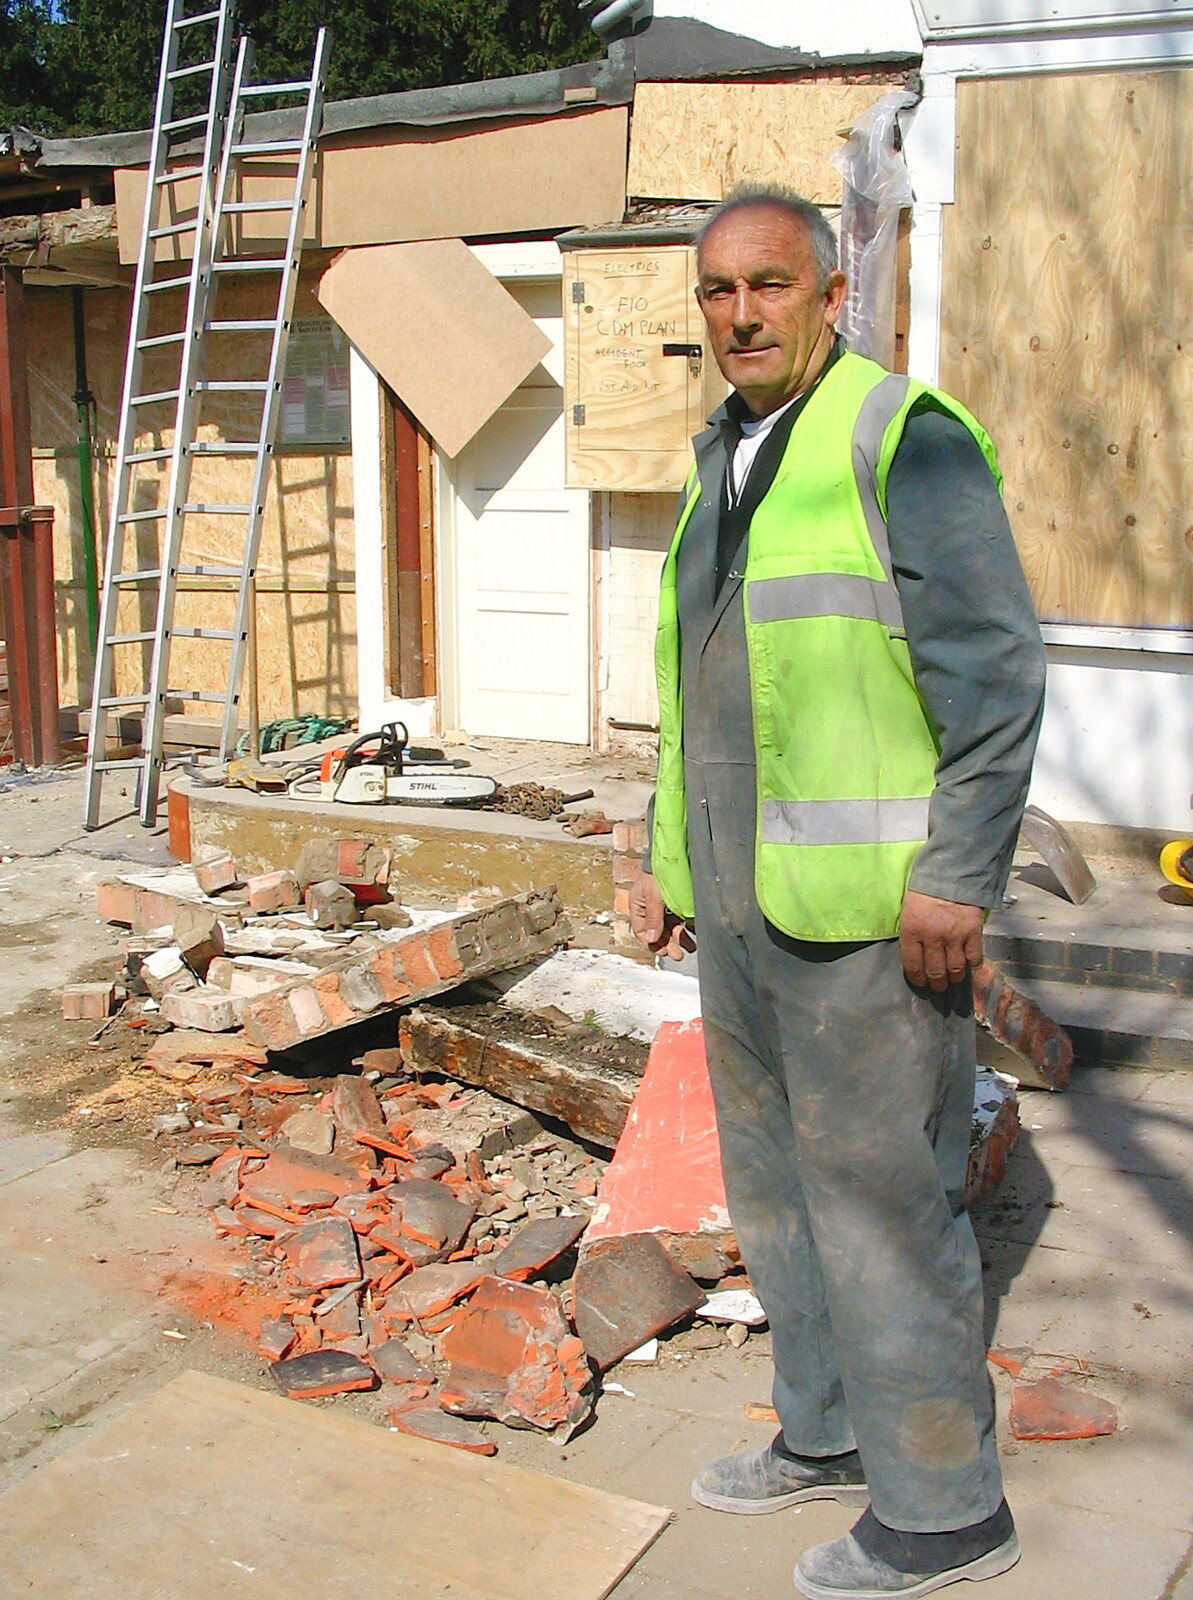 The guy who let Nosher in from The SCC Social Club and the  Demolition of Diss Publishing, Ipswich and Diss - 2nd April 2005